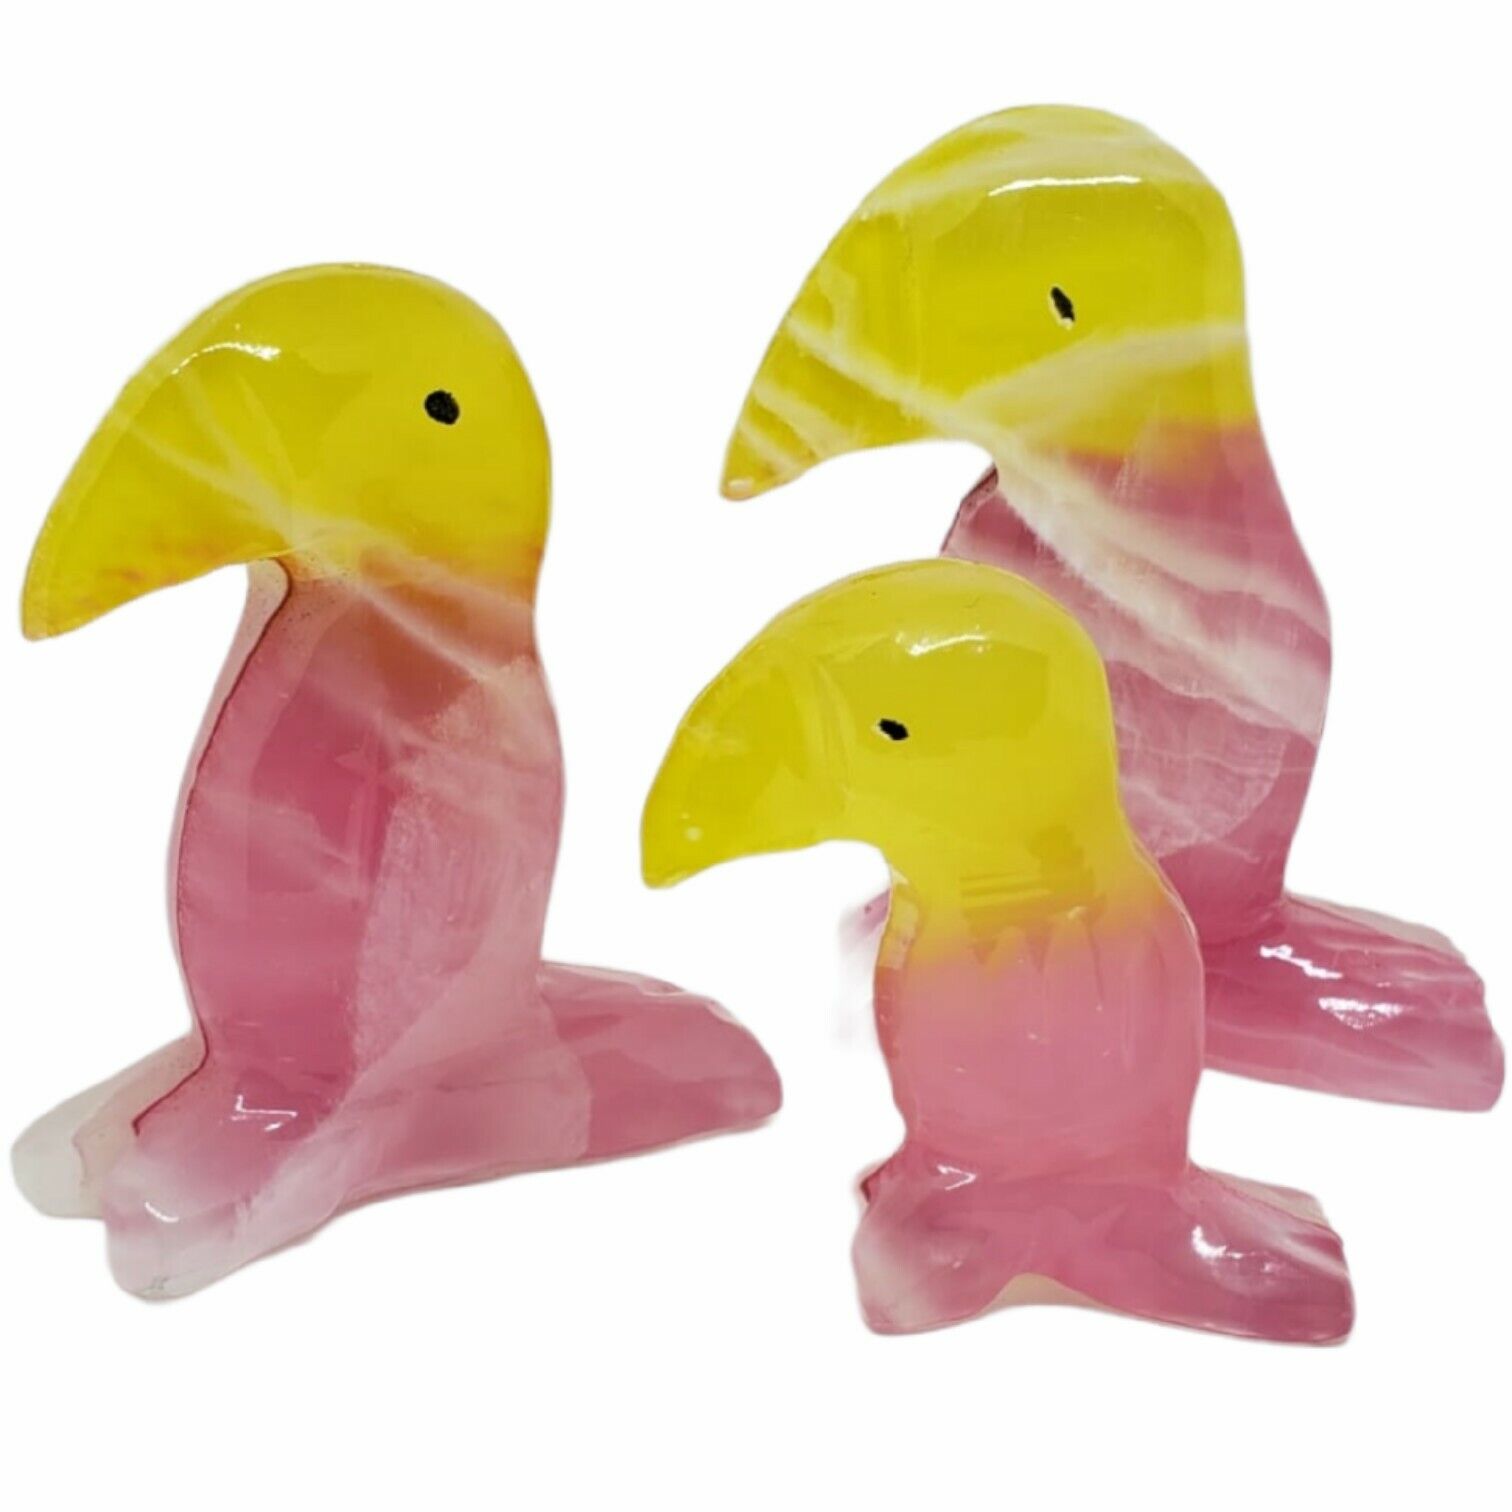 Onyx Carved Stone Marble Toucan Figurine Pink Yellow Colors Set 